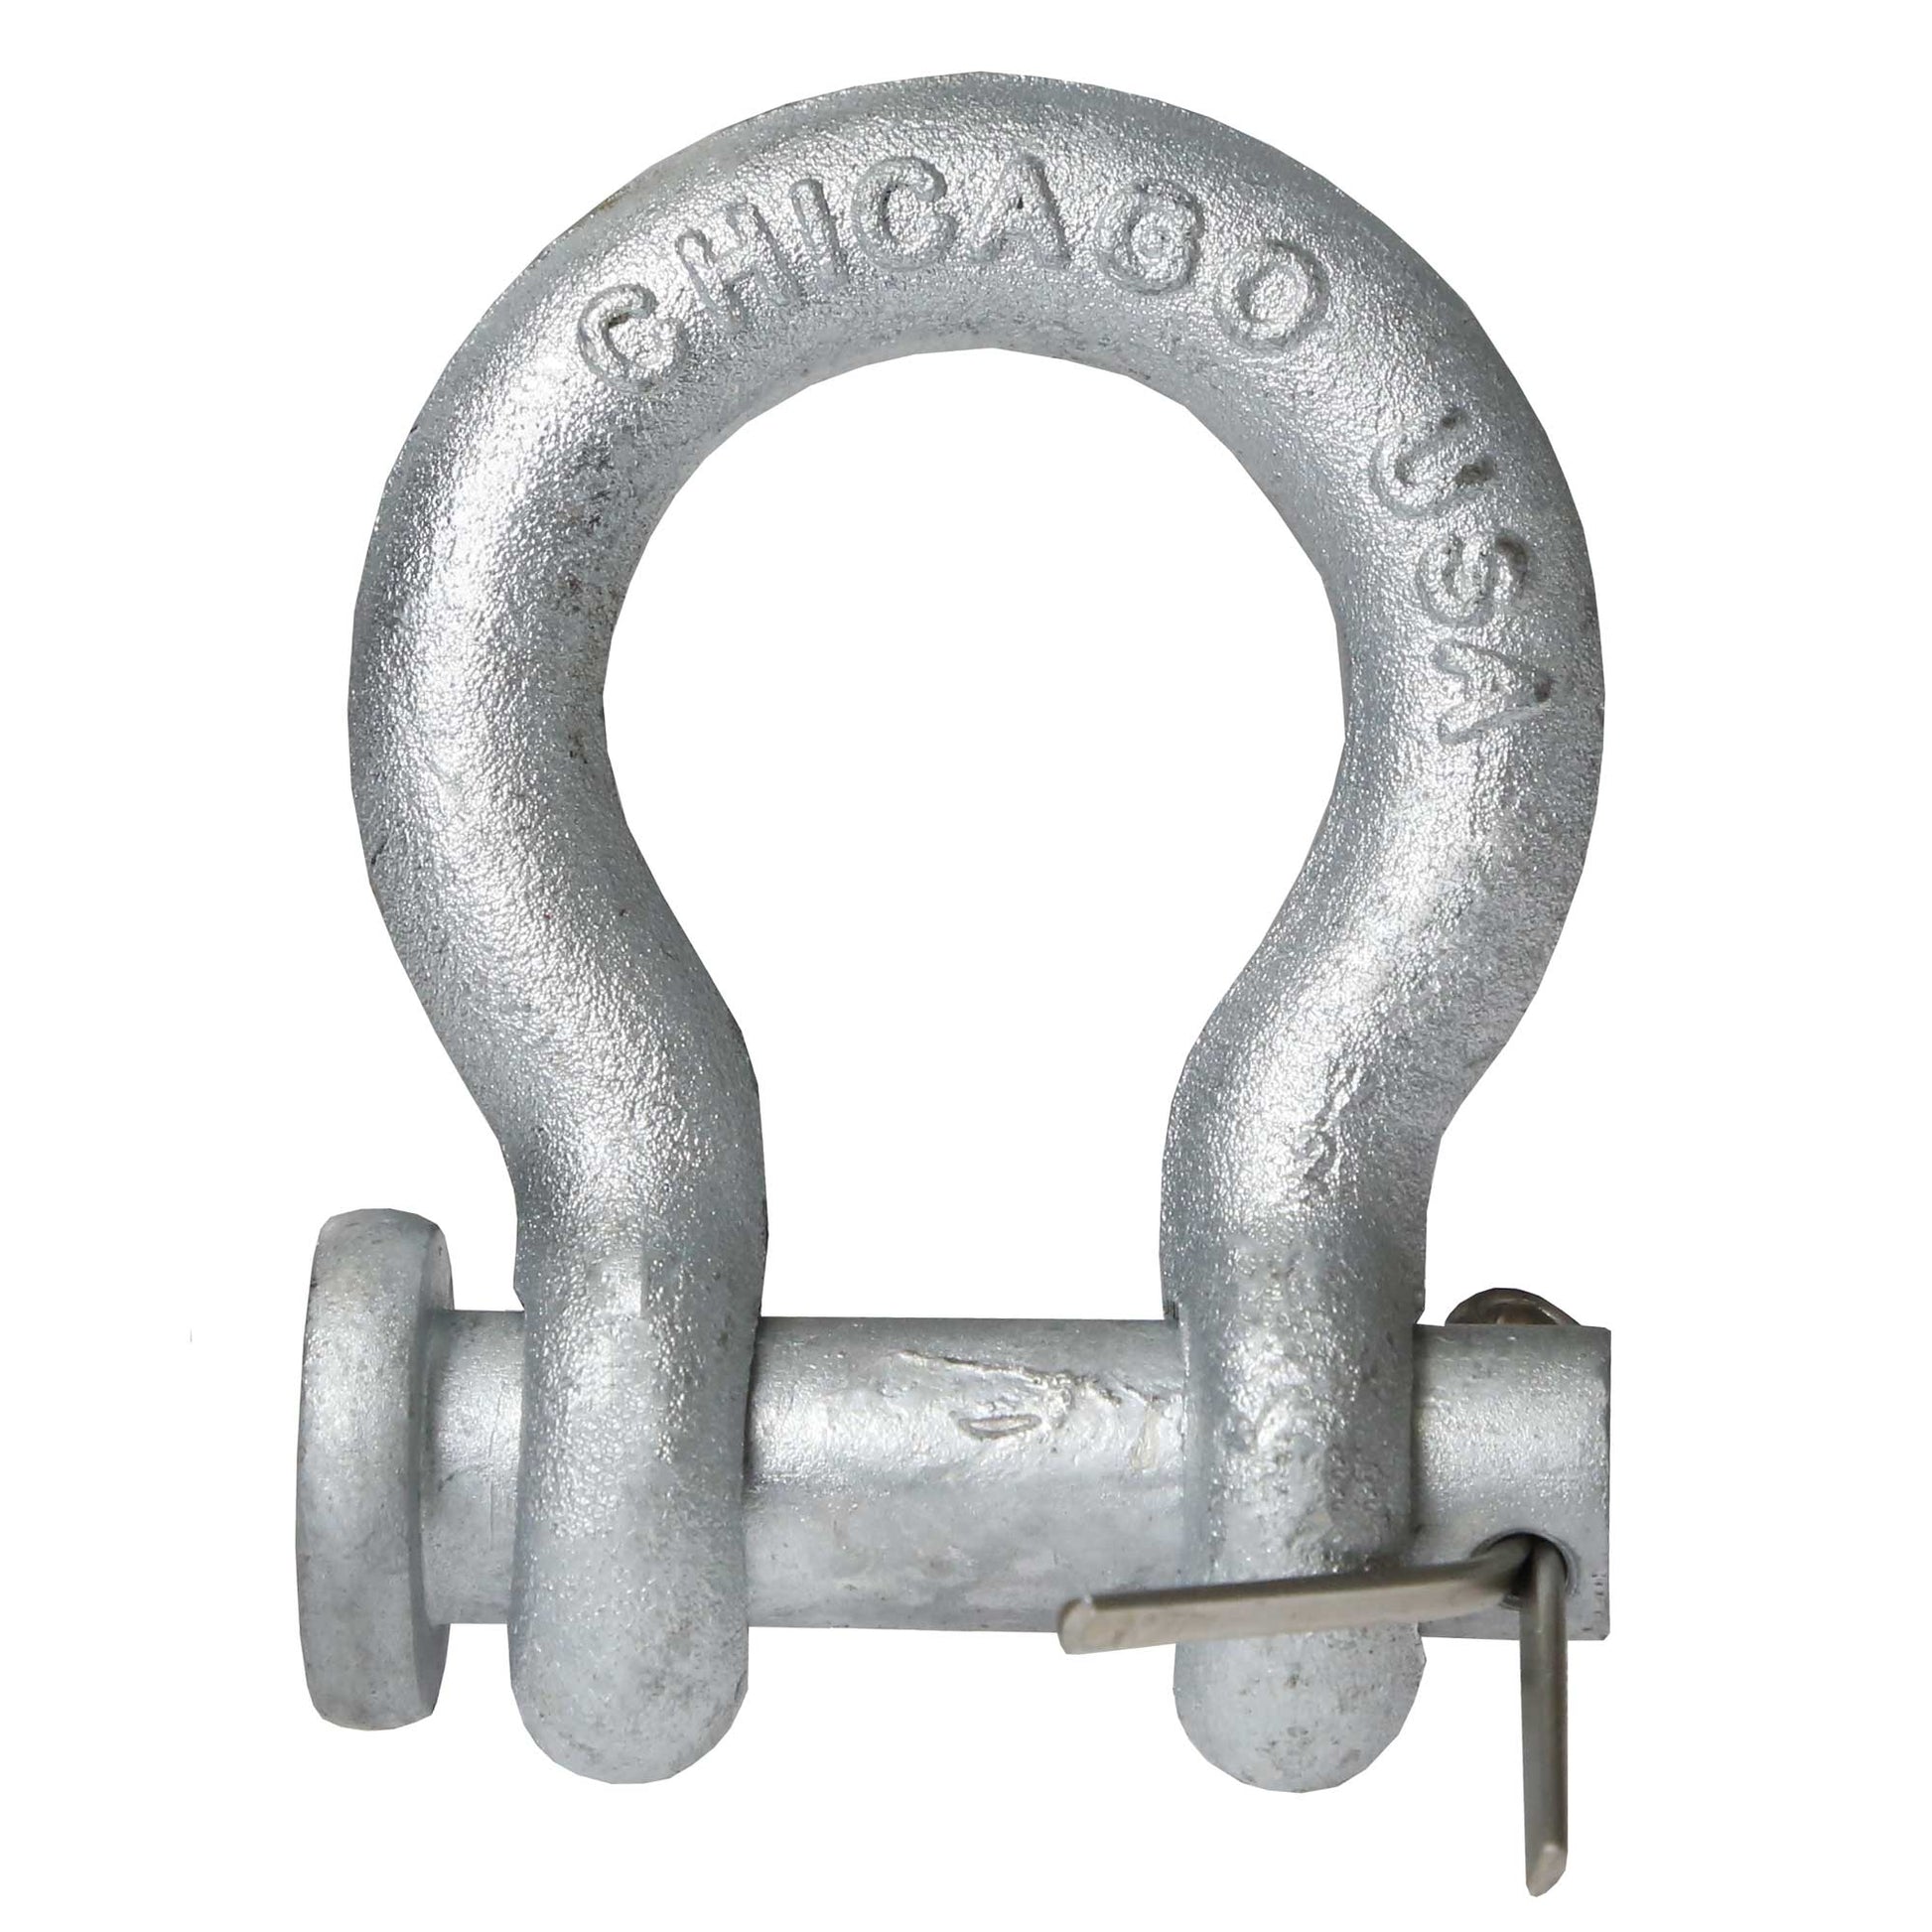 Anchor Shackle - Chicago Hardware - Round Pin - 1/2" Galvanized Steel - 2 Ton primary image